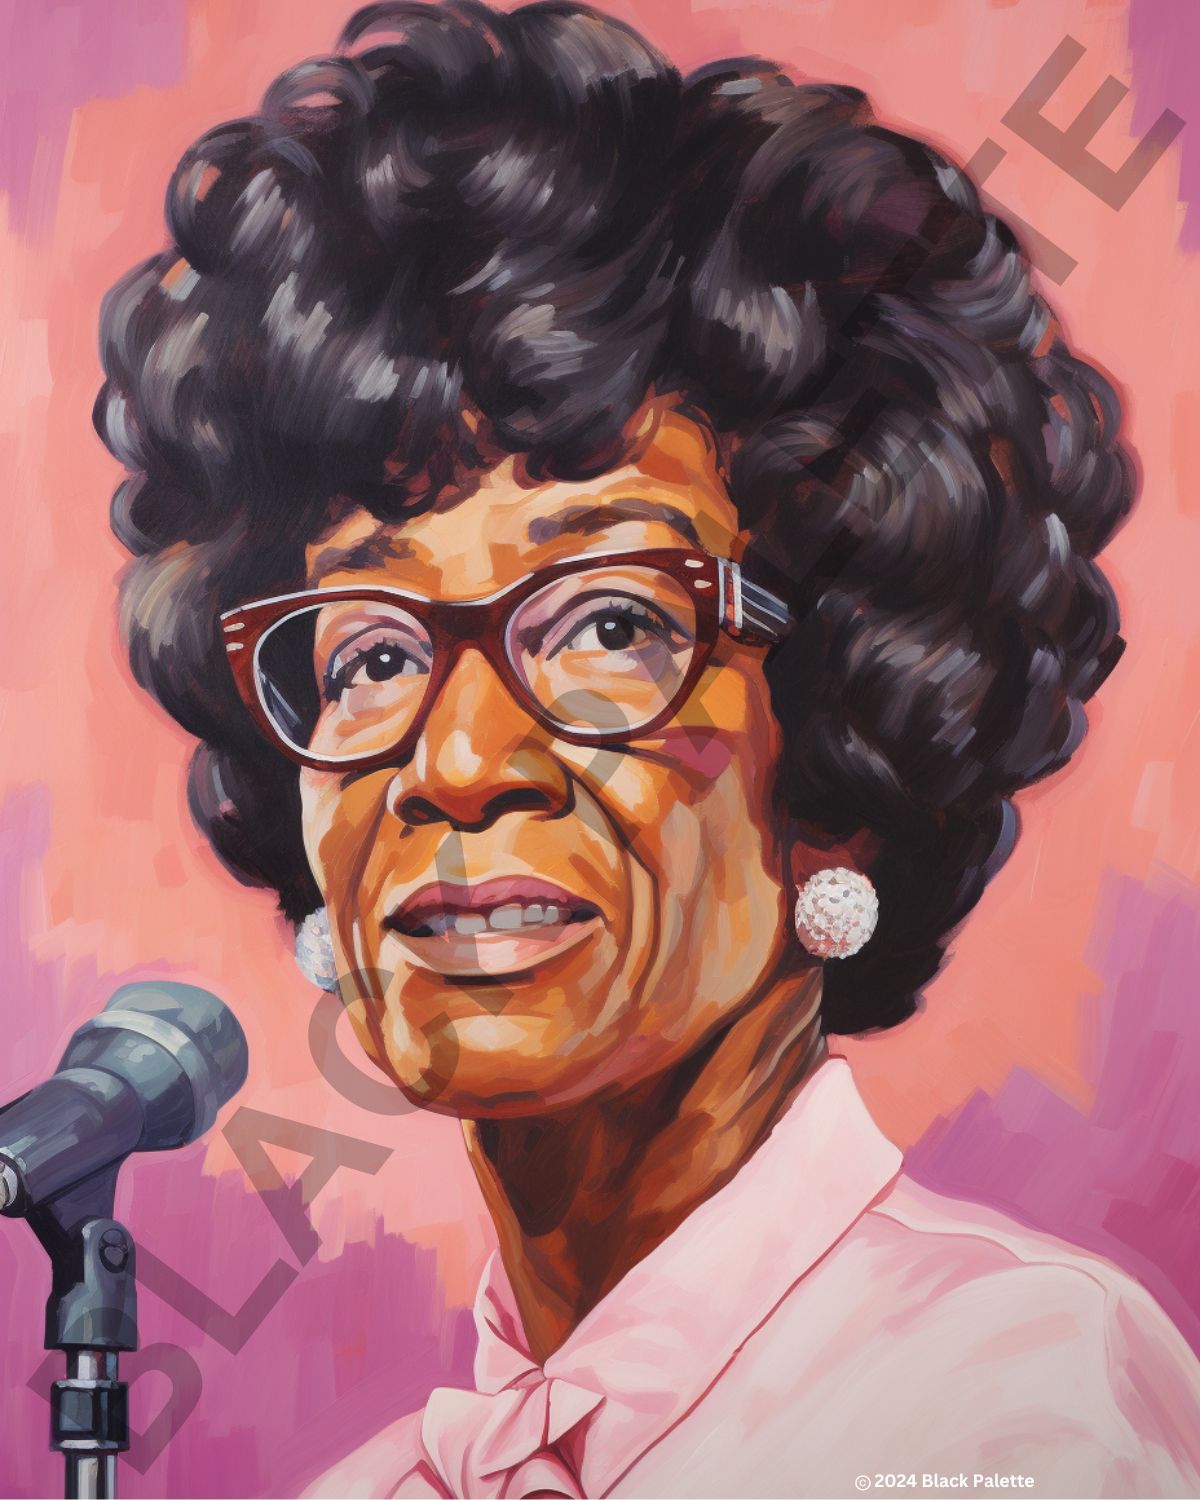 Shirley Chisholm depicted with a microphone, reflecting her powerful oratory skills.